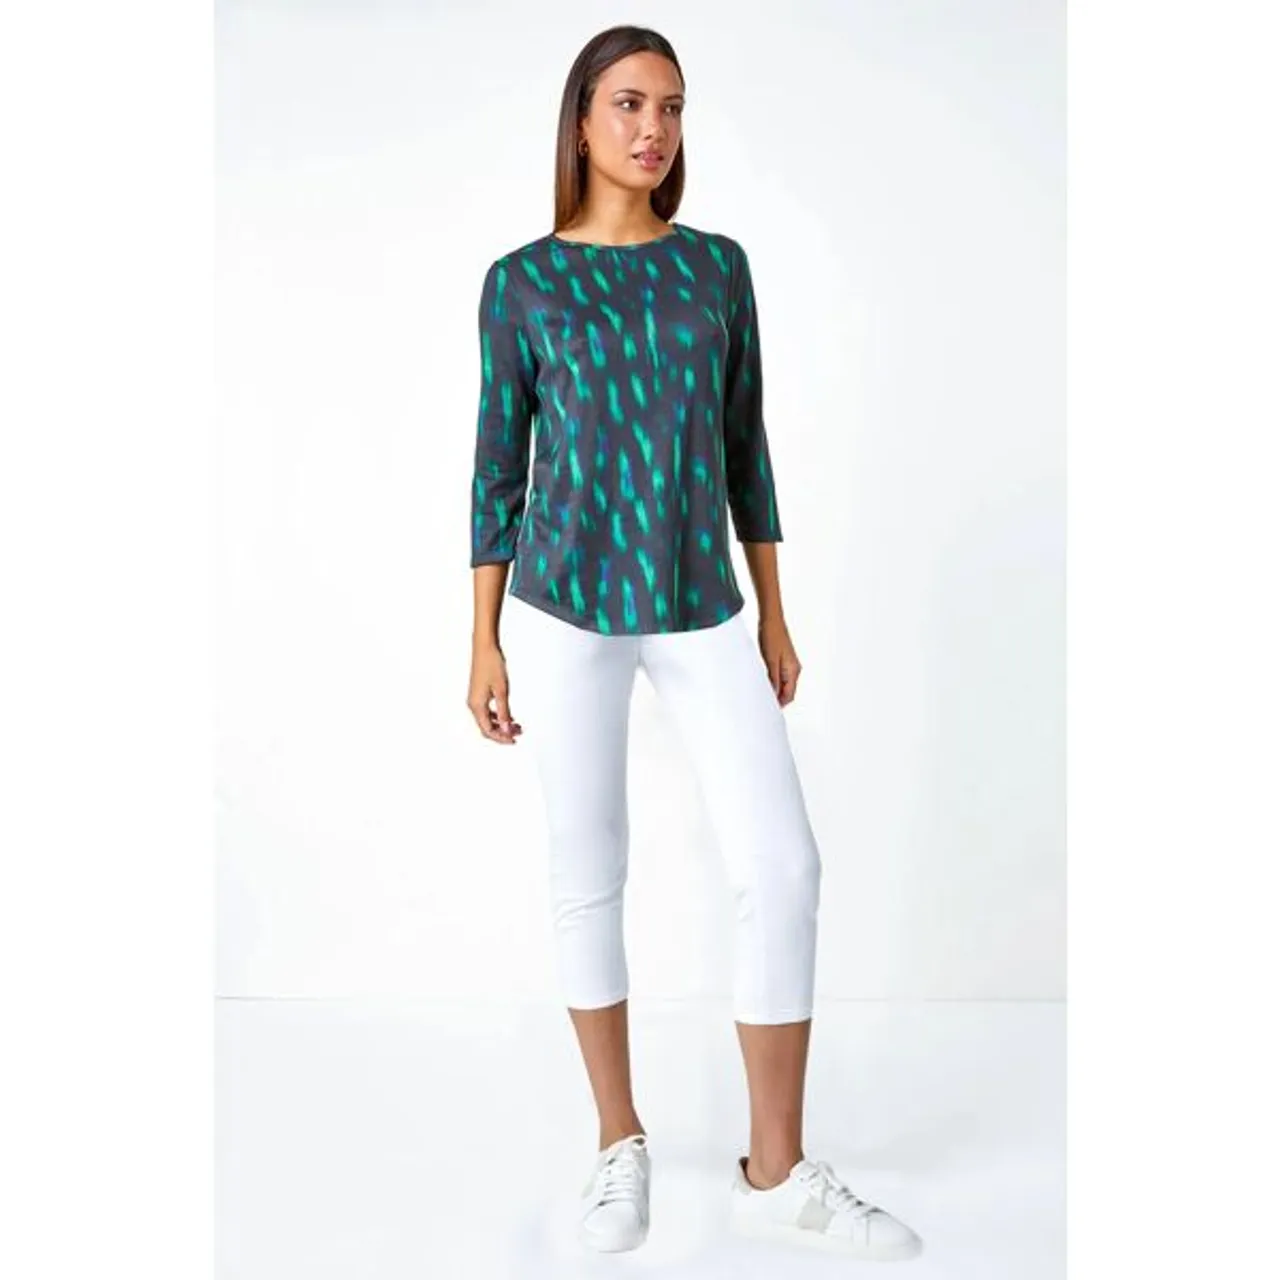 Roman Abstract Scoop Hem Stretch Top in Green 18 female